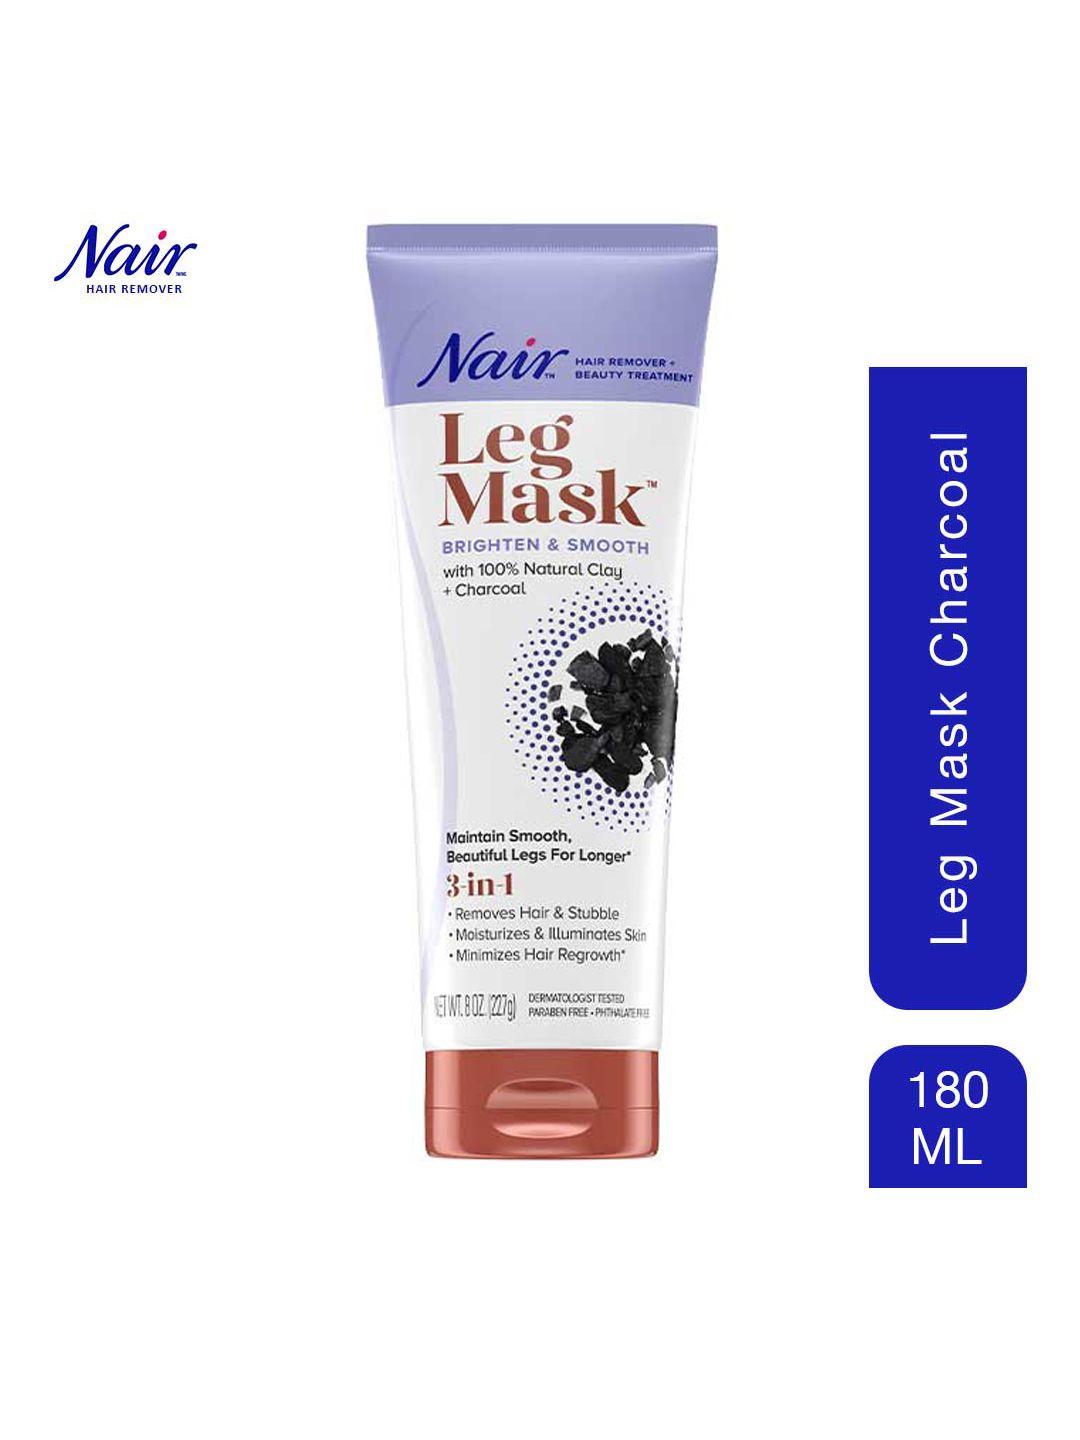 nair 3-in-1 leg mask depilatory cream with natural clay & charcoal extract - 180ml